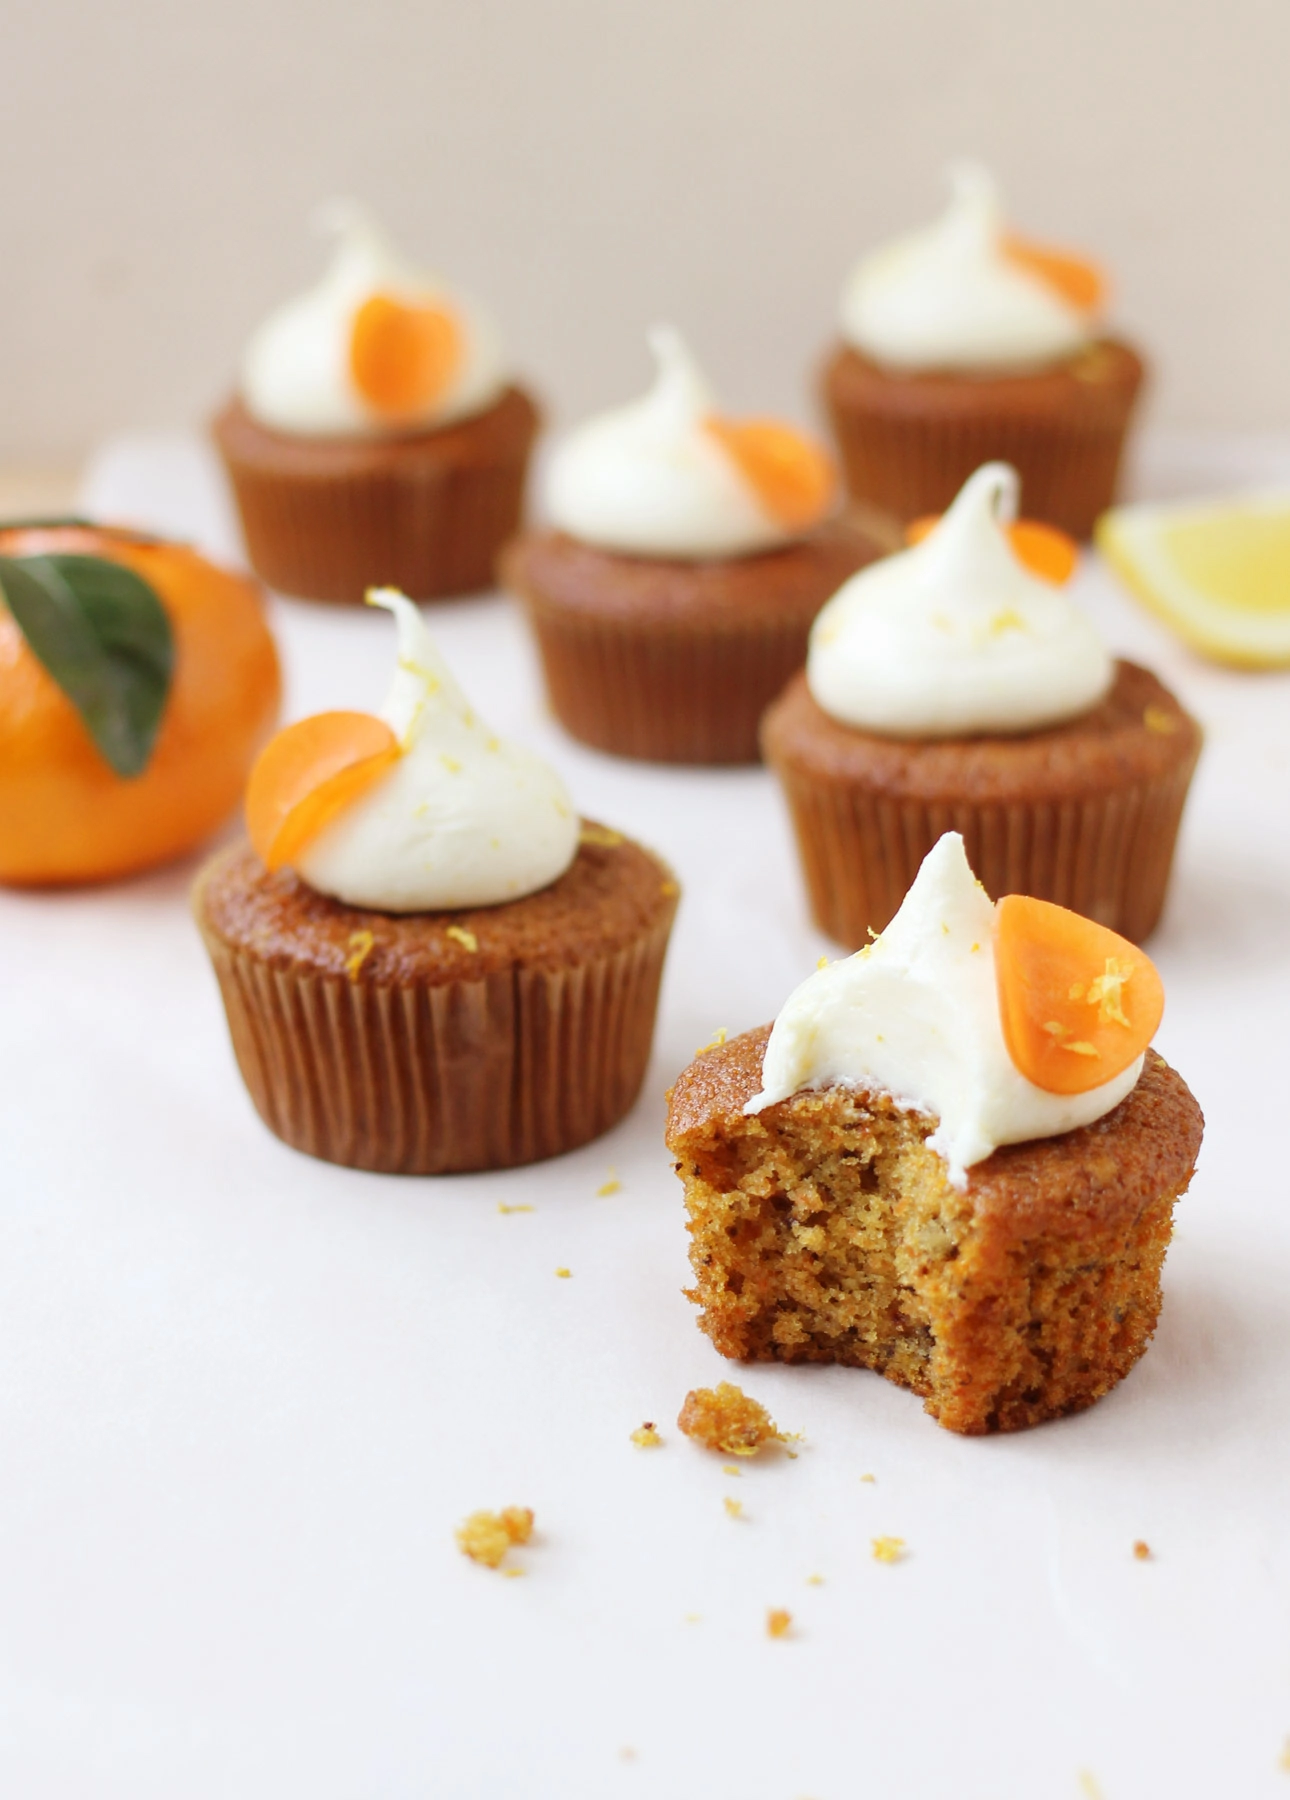 Orange and Carrot Cupcakes with Zesty Cream Cheese Frosting, one of 35 Irresistible Orange Dessert Recipes on FoodNouveau.com